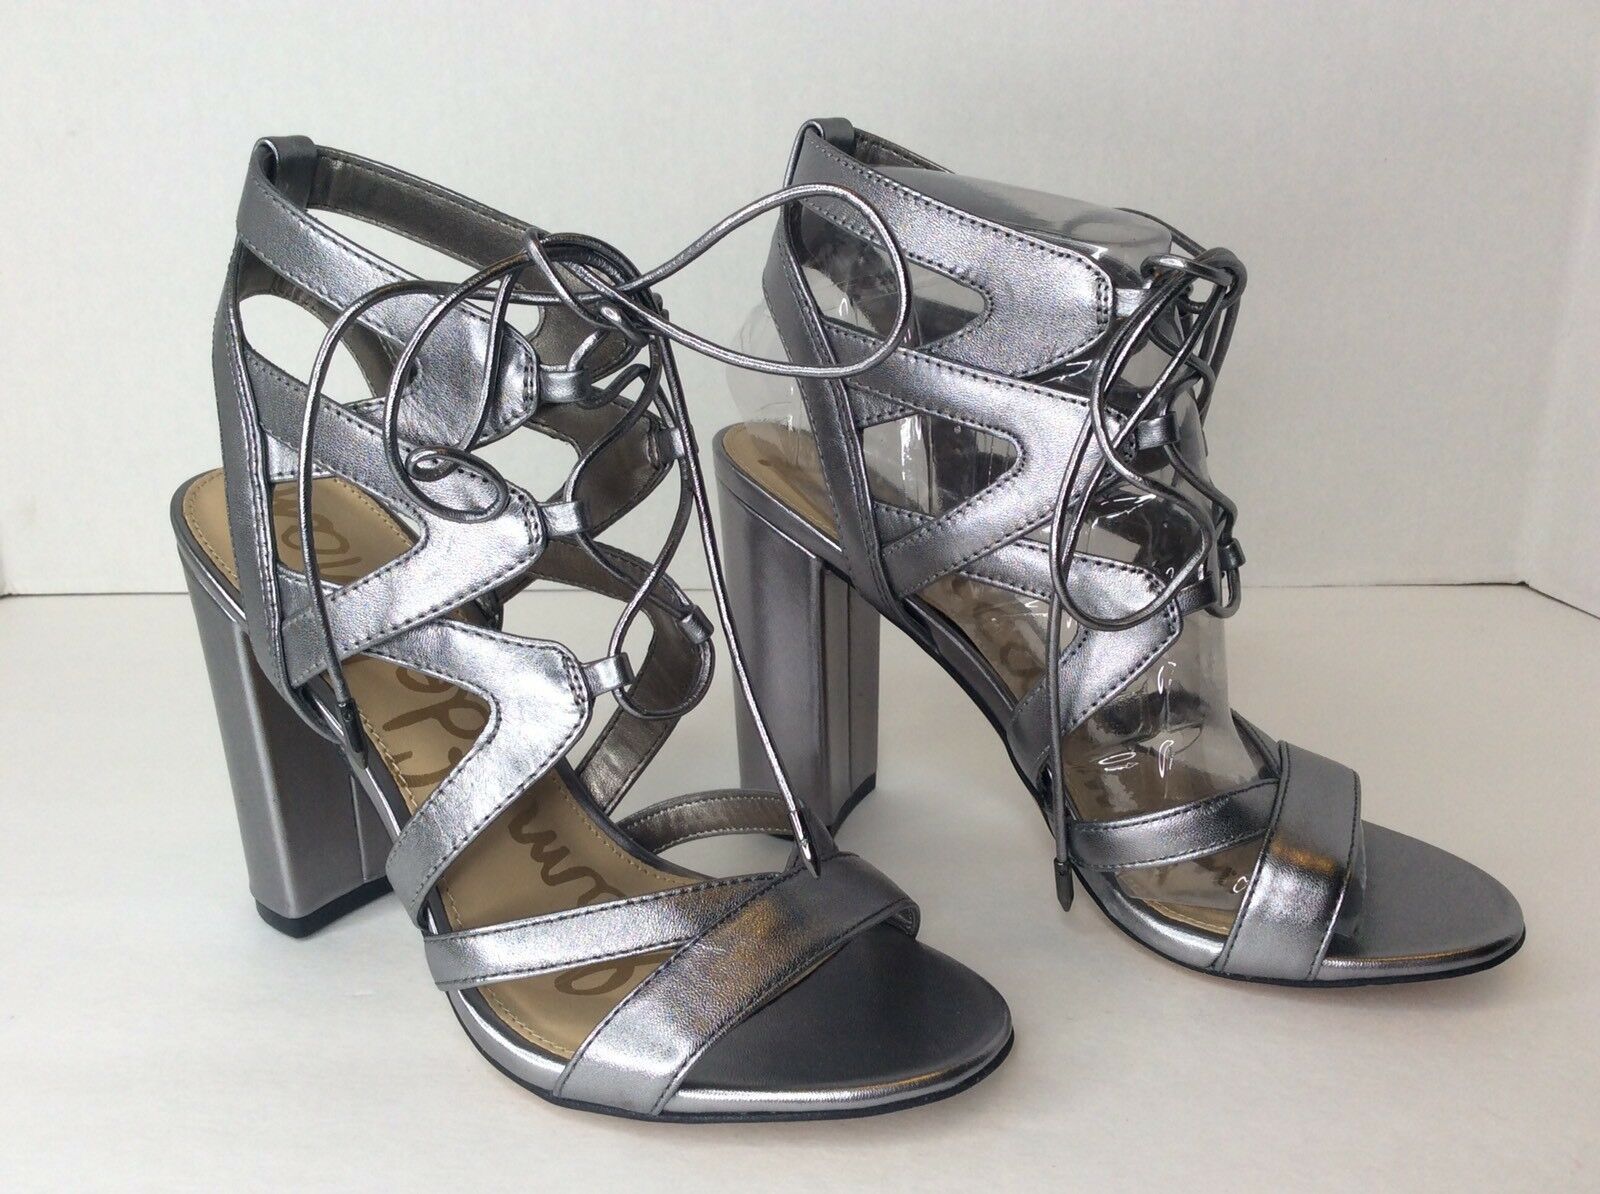 Primary image for Sam Edelman Yardley Womens Size 6 Metallic Silver Leather Strappy Sandals Heels